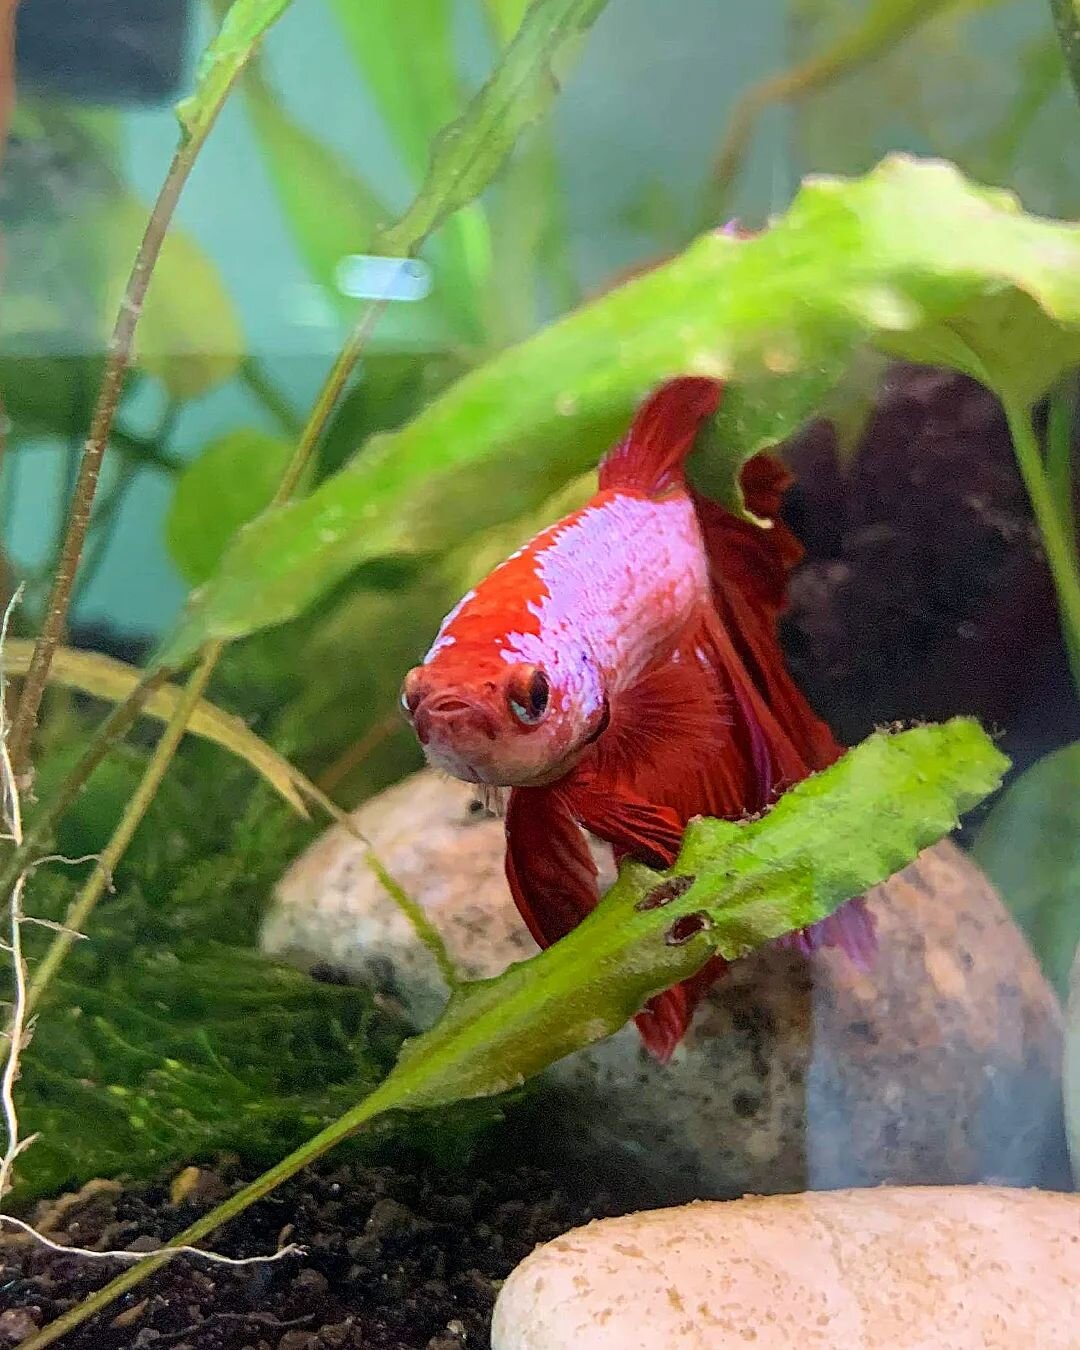 A year since this beautiful, grumpy boy left us forever and I still miss him every day. Rest in peace little man 💔

#troilusthemighty #fish #betta #bettafish #troilus #fishlover #kampfisk #siamesefightingfish #fightingfish #vis #pet #huisdier #pets 